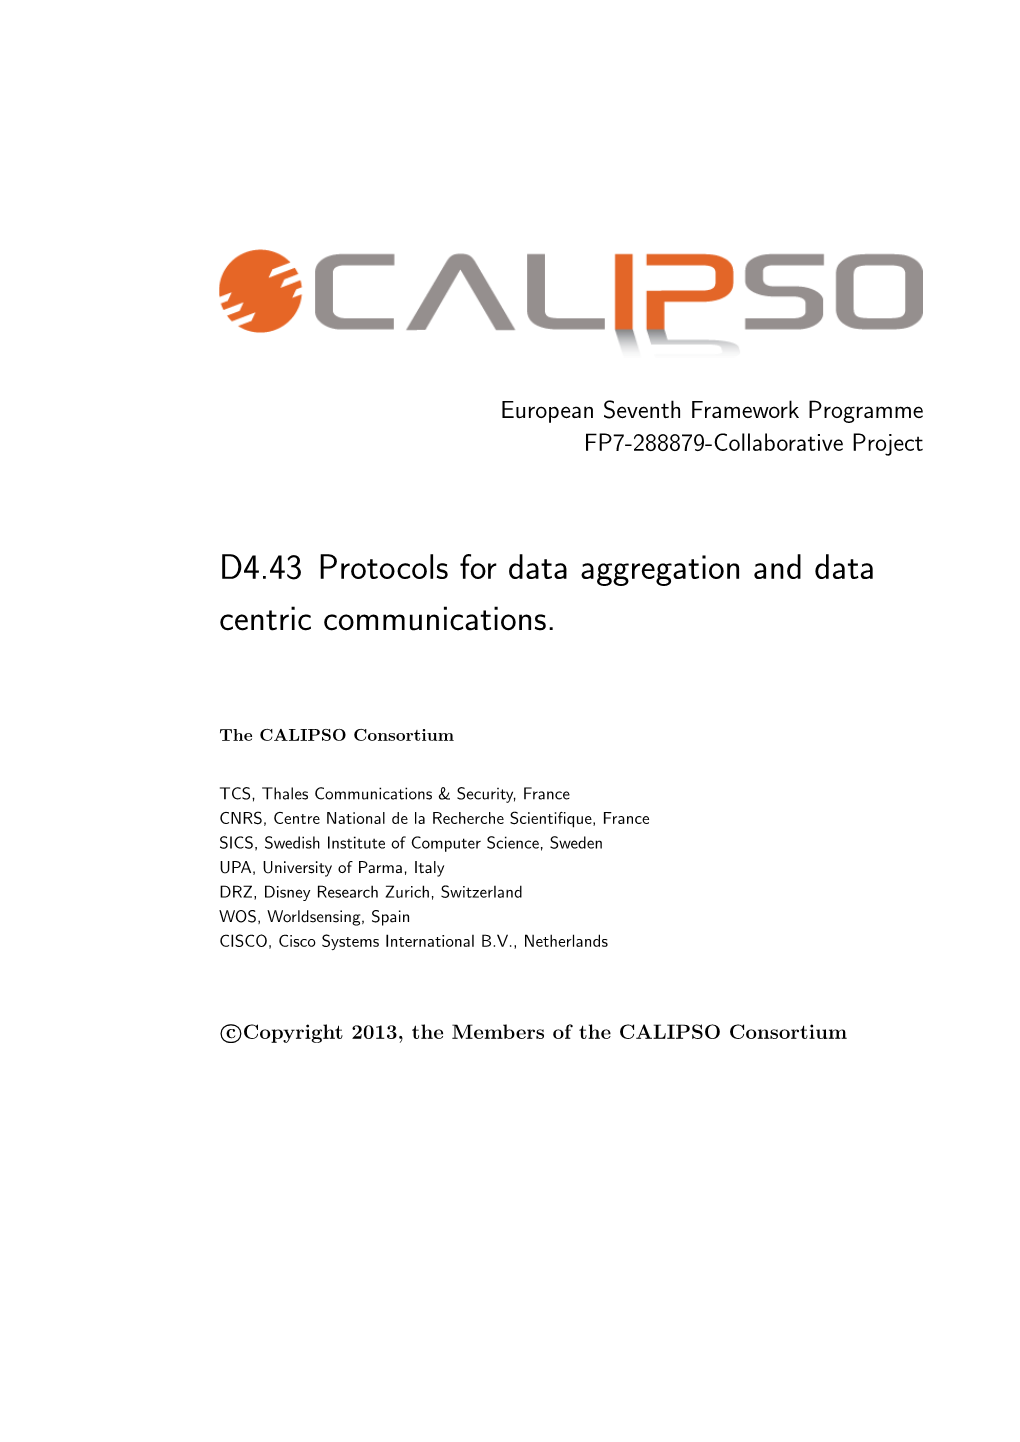 D4.43 Protocols for Data Aggregation and Data Centric Communications